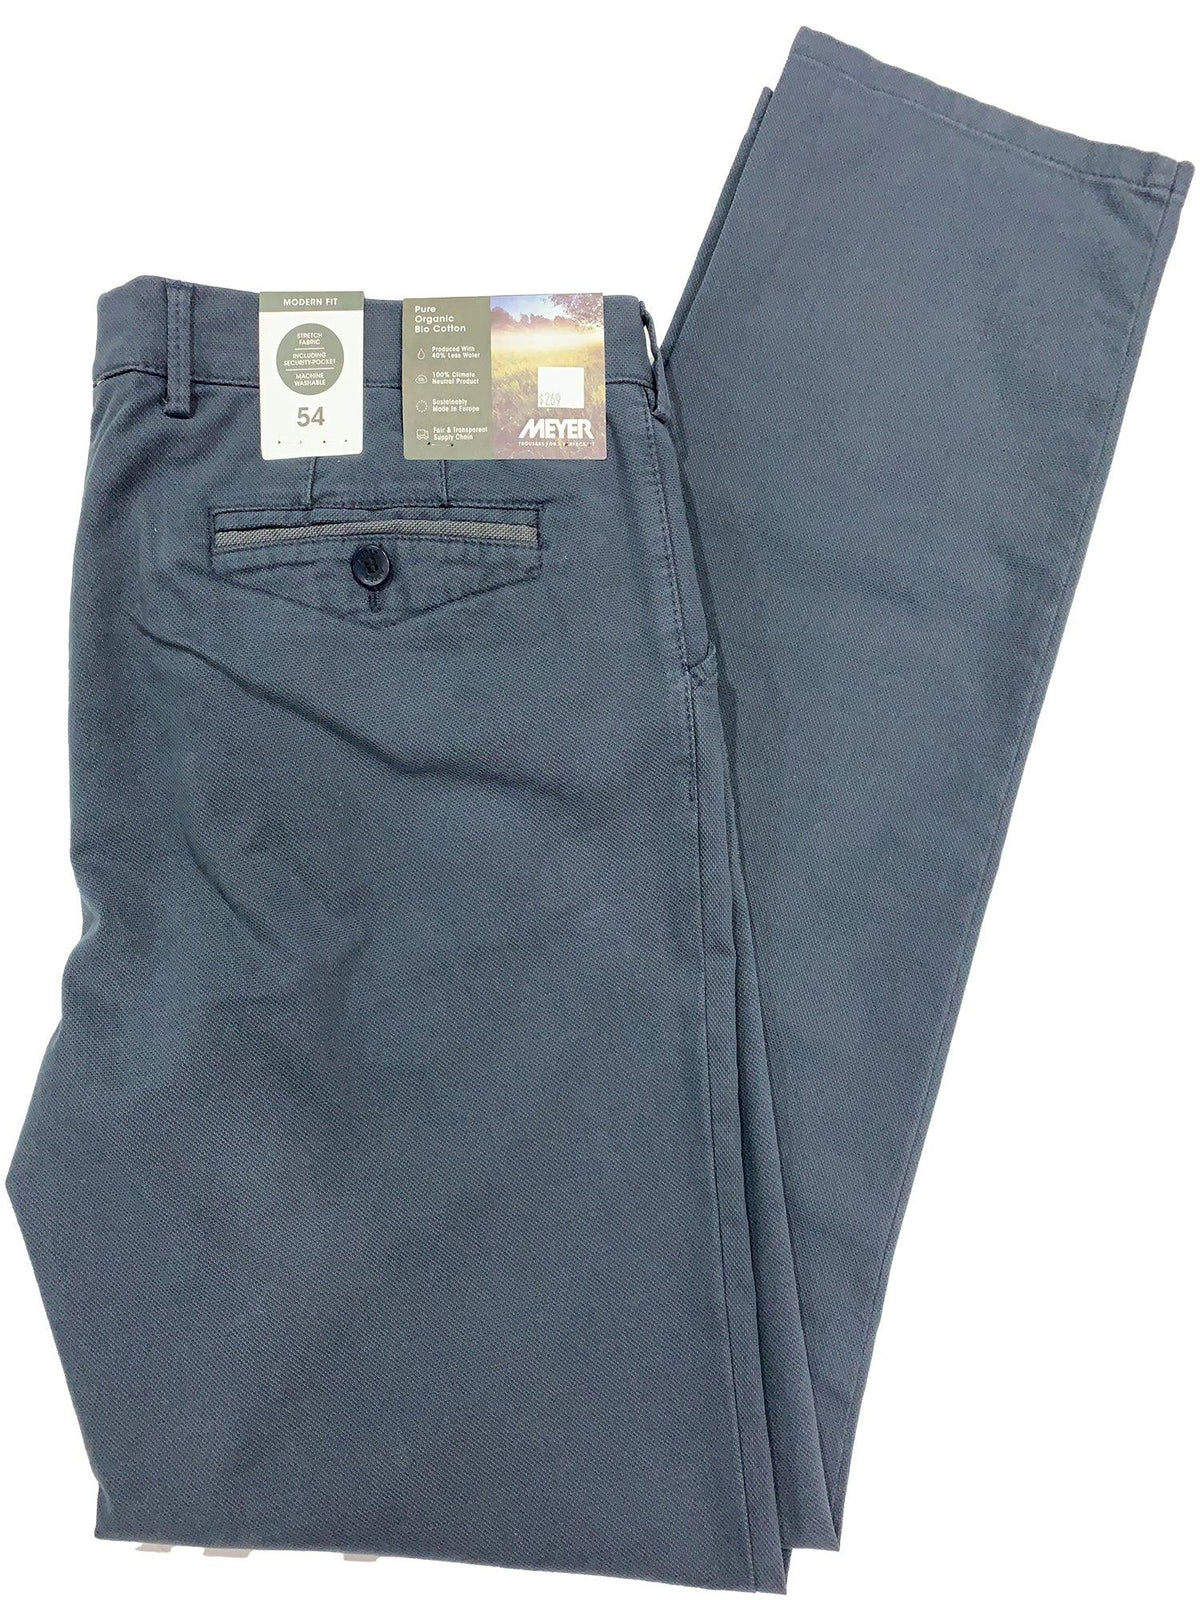 Meyer Chicago-5566-18 - Harrys for MenswearMeyer Chicago-5566-18  https://harrysformenswear.com.au/products/meyer-chicago-5566-18  Meyer Chicago Casual Trousers are the perfect fit Invisible comfort created by high-performance super-stretch fabrics. 97% Cotton 3% Elastane Made in Romania Two side pockets with rear jetted pockets Fob pocket with contrast trim Internal security pocket with zip Full-extension band with metal Clip + 2 buttons for a fi…